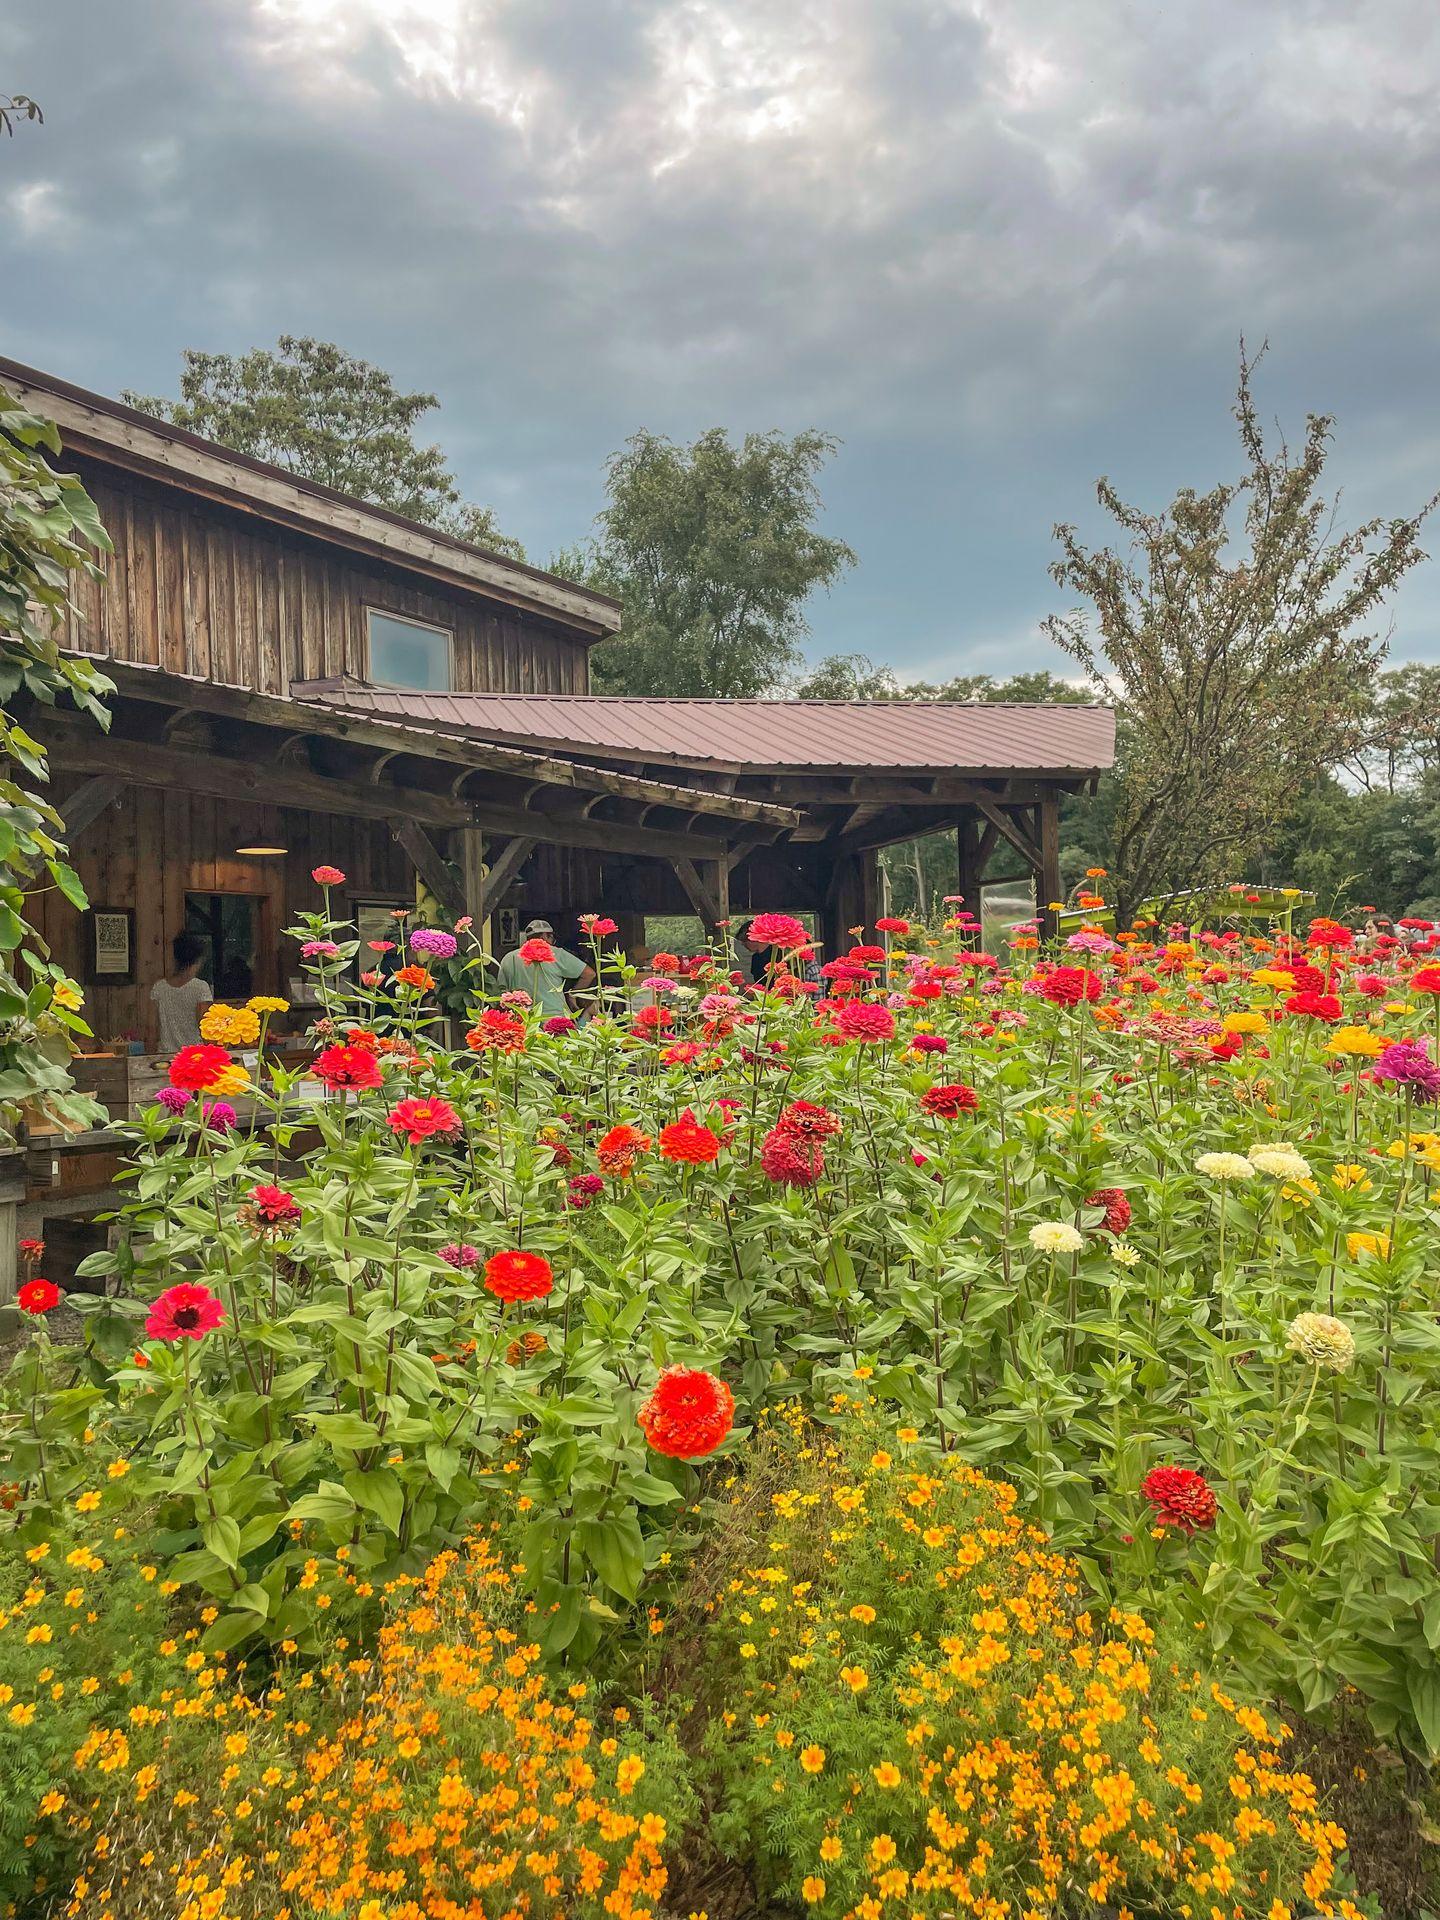 Flowers in front of a brown building at Indian Creek Farm.